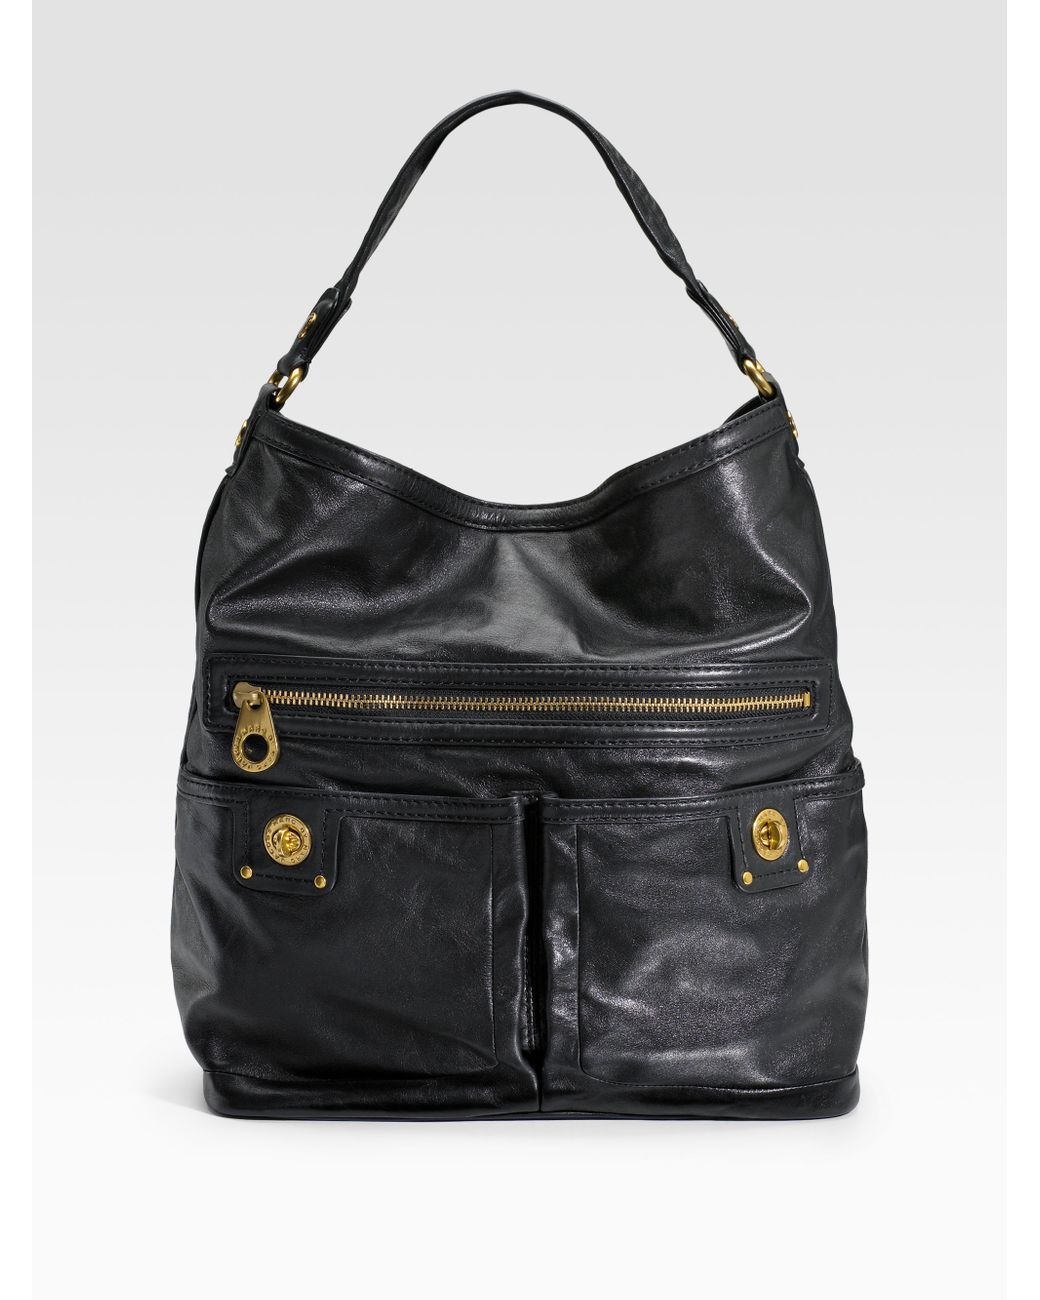 Marc by Marc Jacobs Black Coated Fabric Totally Turnlock Percy